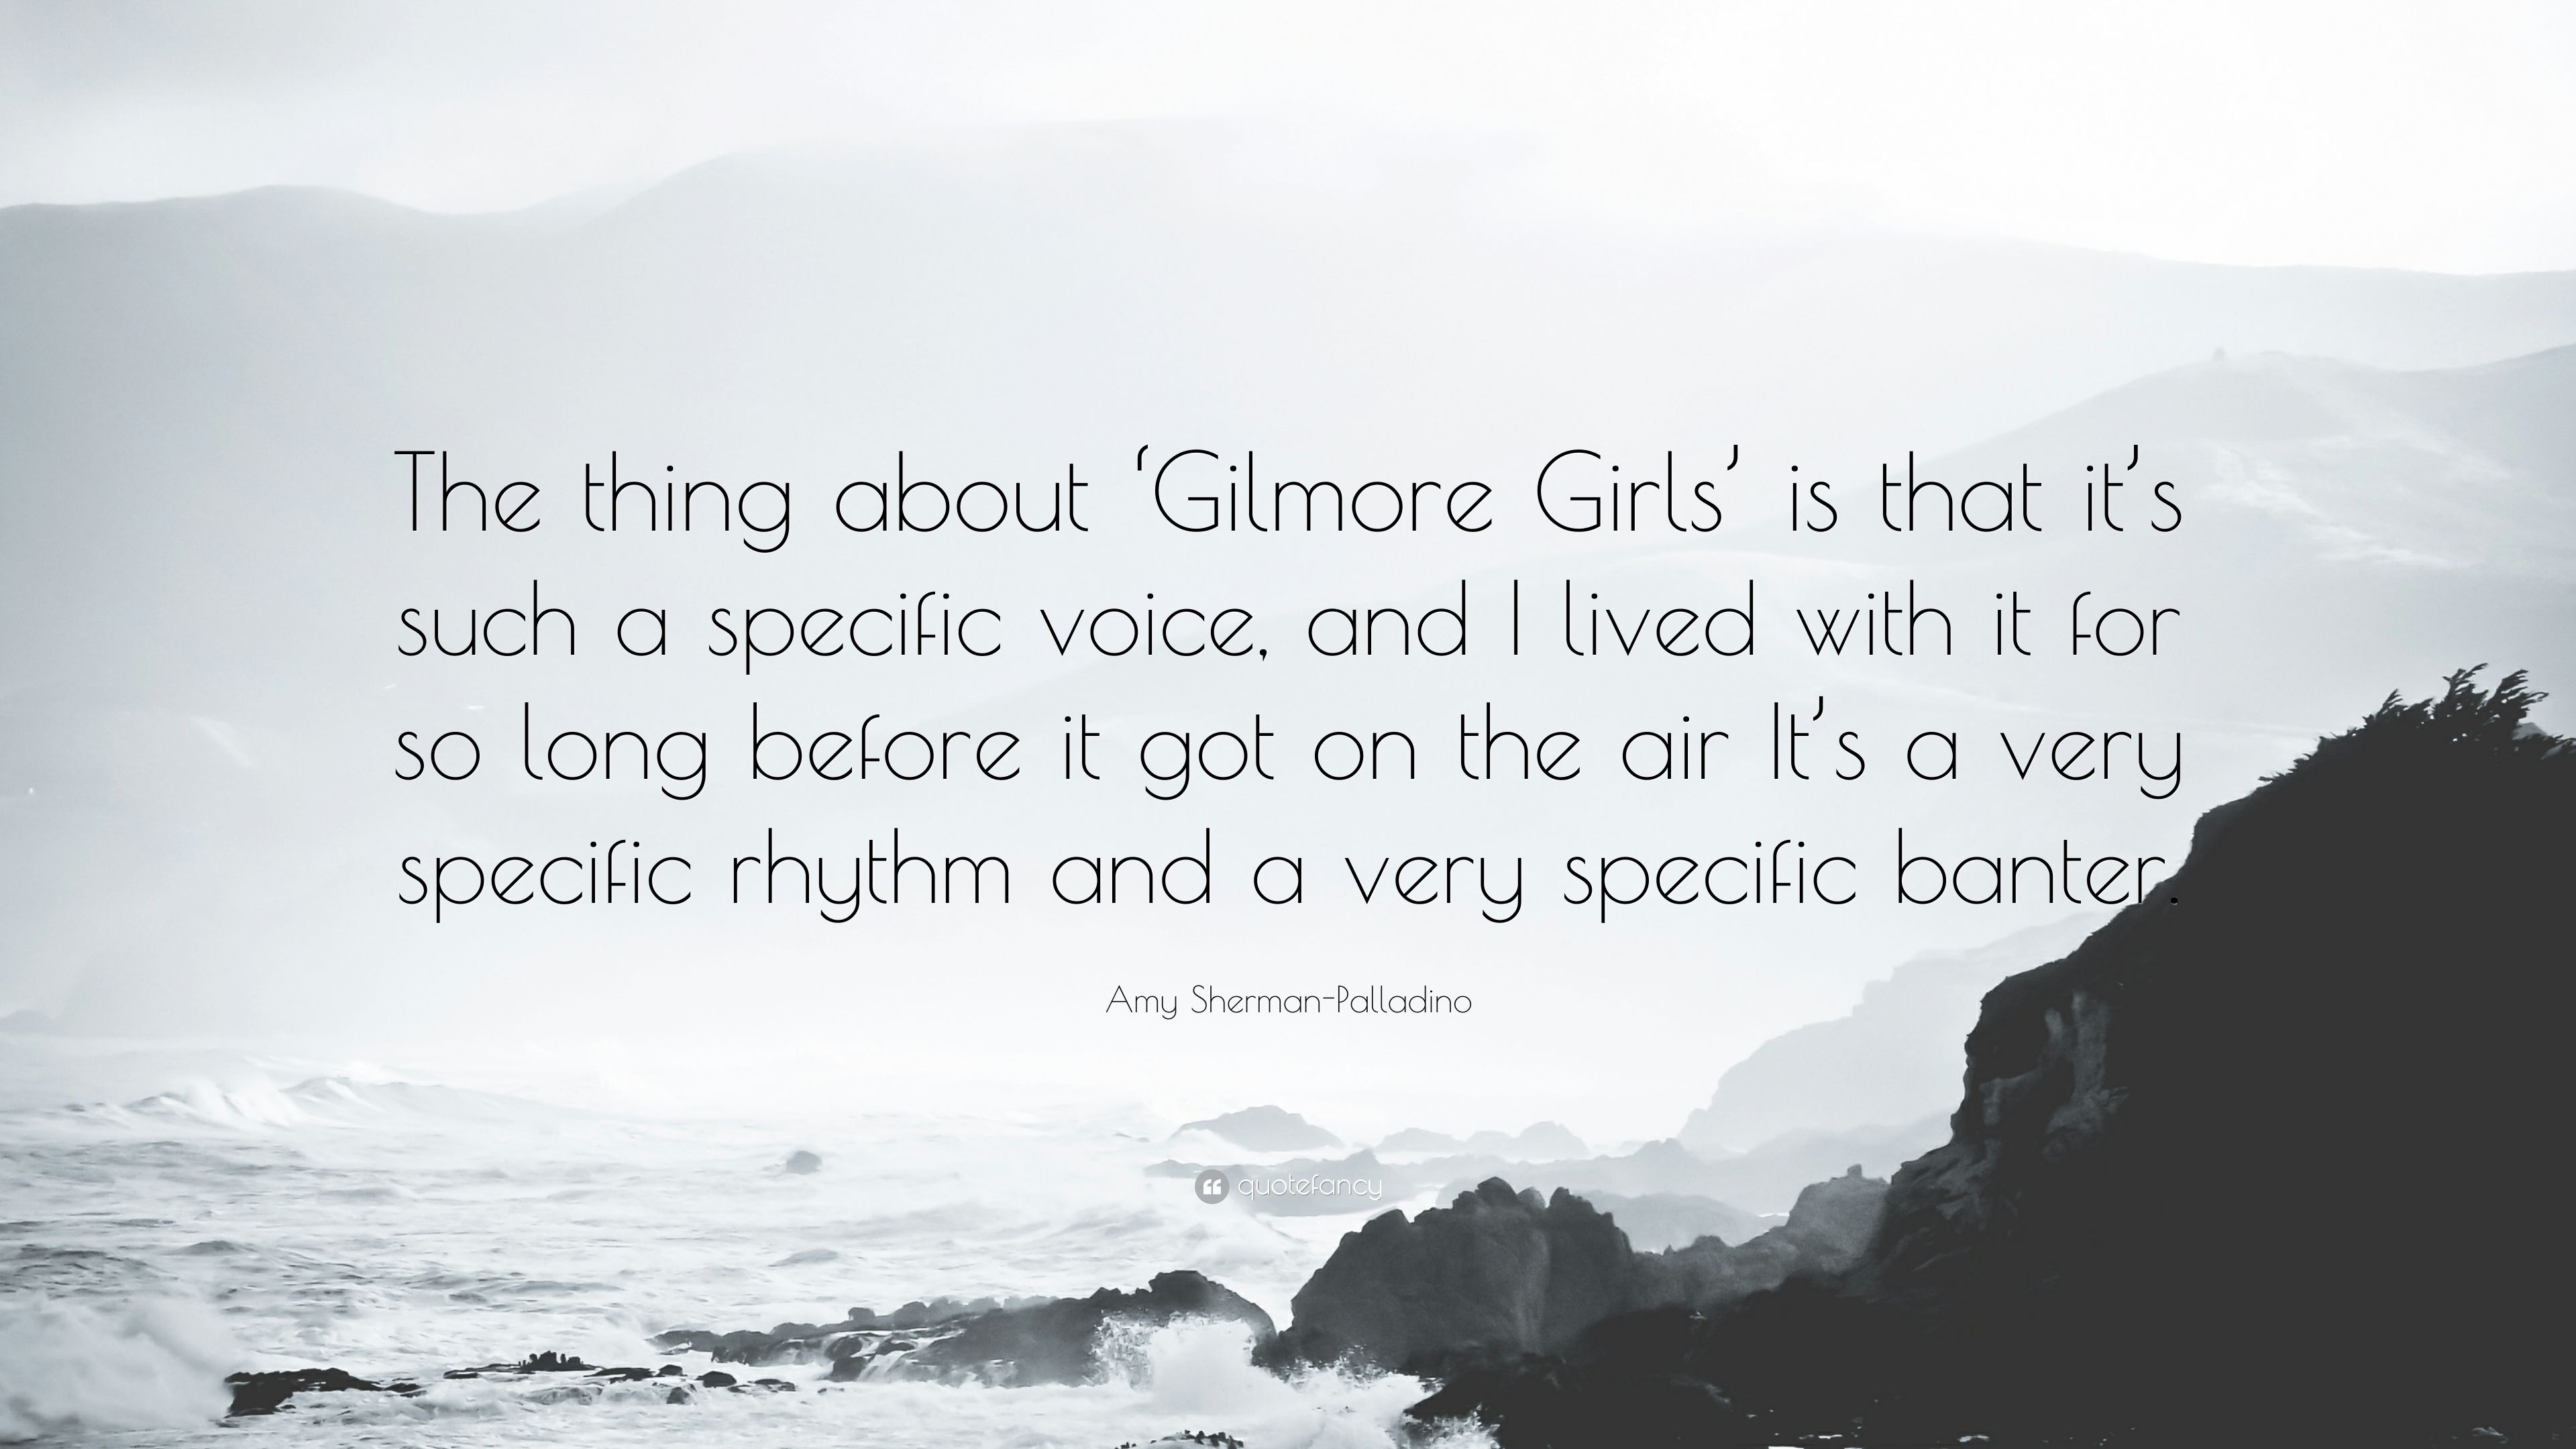 Amy Sherman Palladino Quote: “The Thing About 'Gilmore Girls' Is That It's Such A Specific Voice, And I Lived With It For So Long Before It Got On The.” (7 Wallpaper)